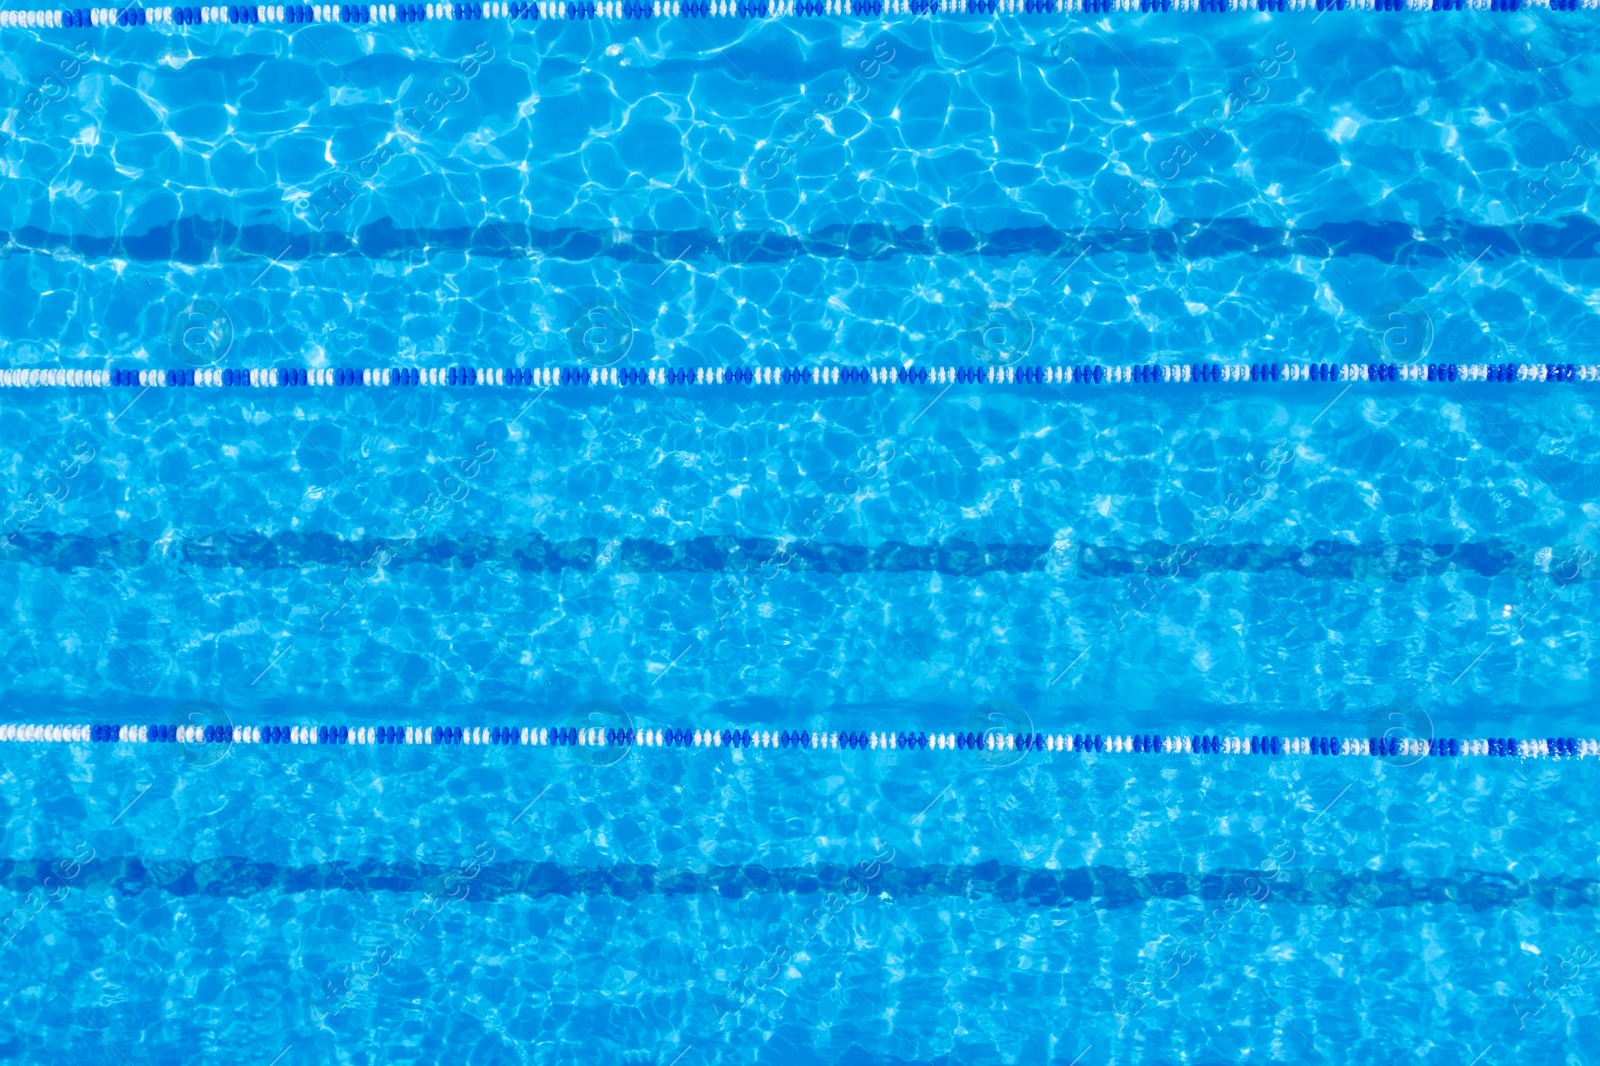 Image of Swimming pool with racing lane dividers, top view